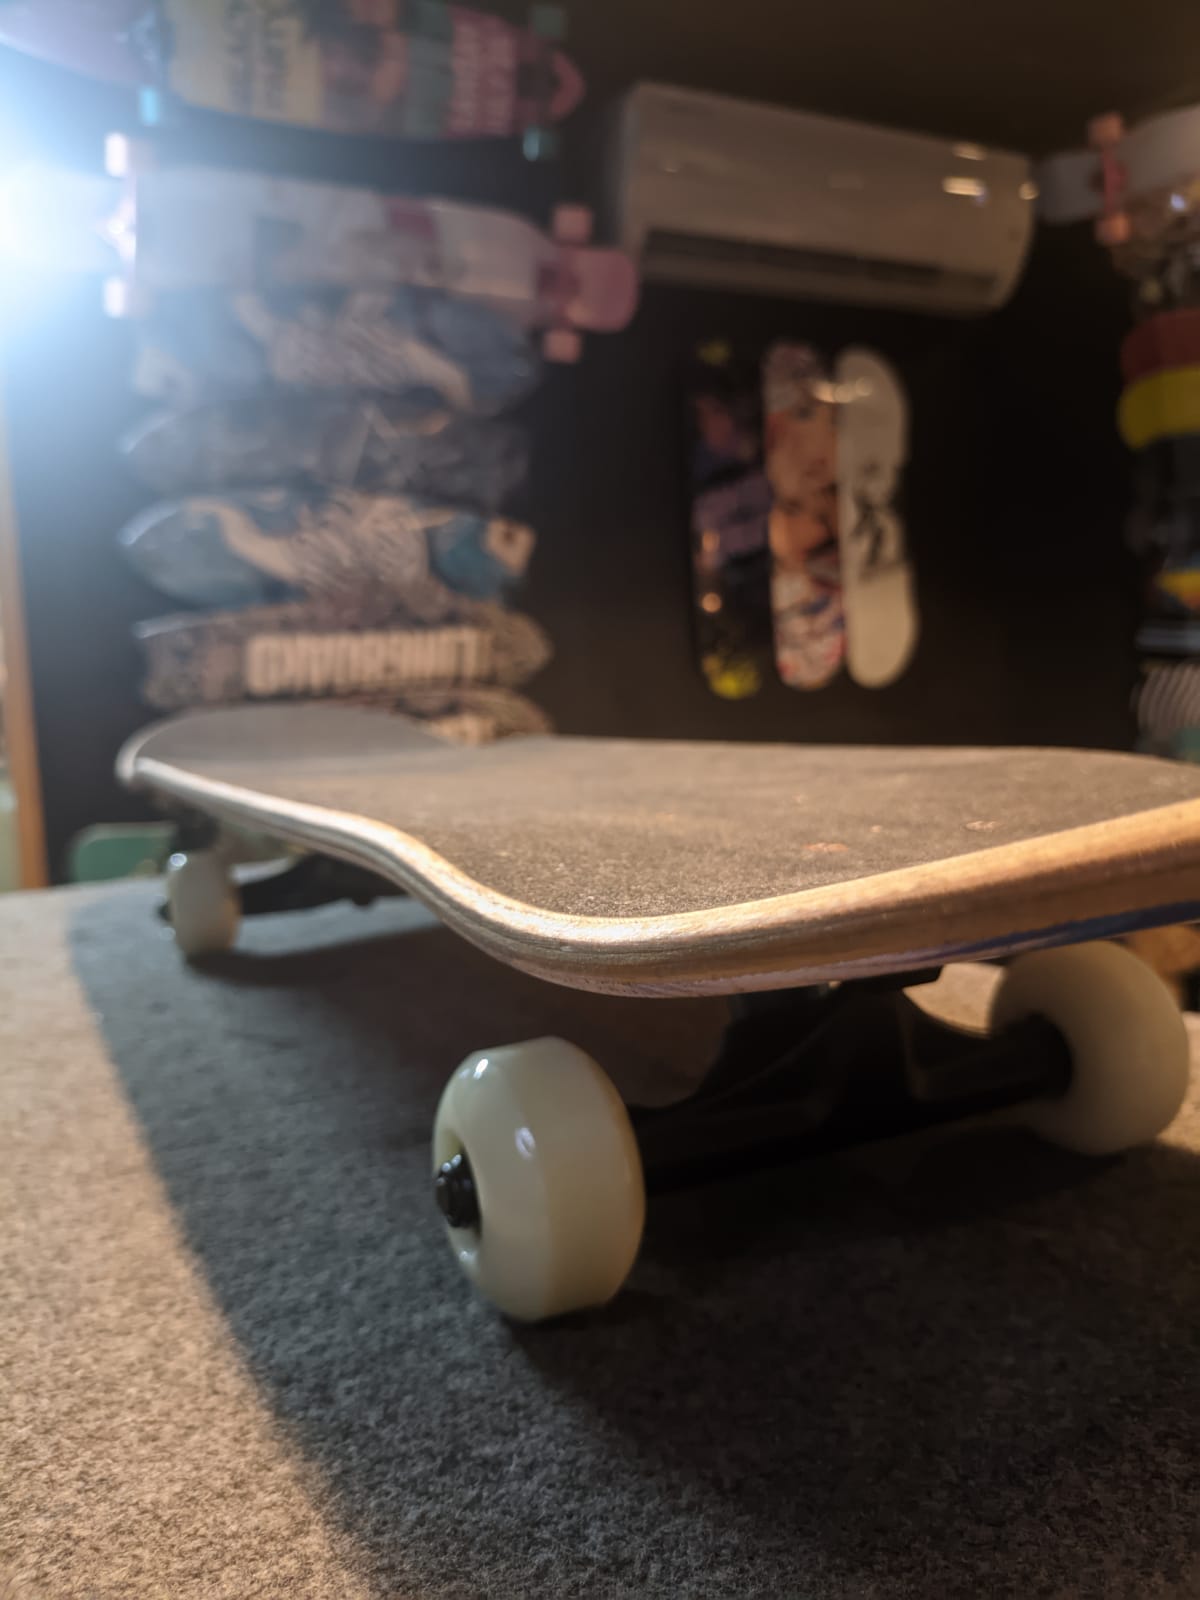 This form of skating covers many styles, so professional skaters require boards that satisfy their specific needs. The preferred boards range between 8 - 8.125 inches.